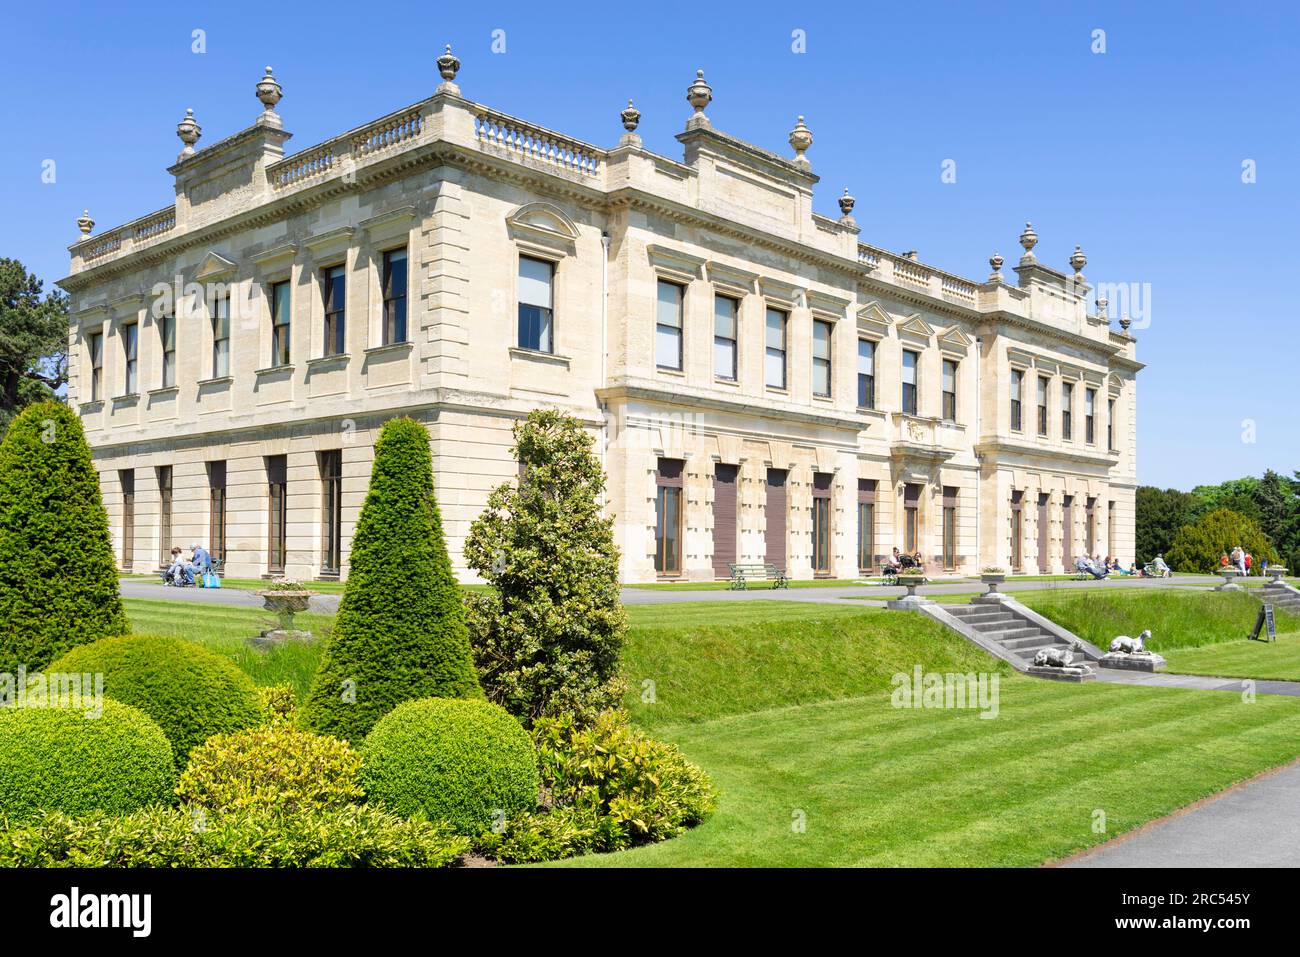 Brodsworth Hall et Topiary exposer à Brodsworth Hall près de Doncaster South Yorkshire Angleterre GB Europe Banque D'Images